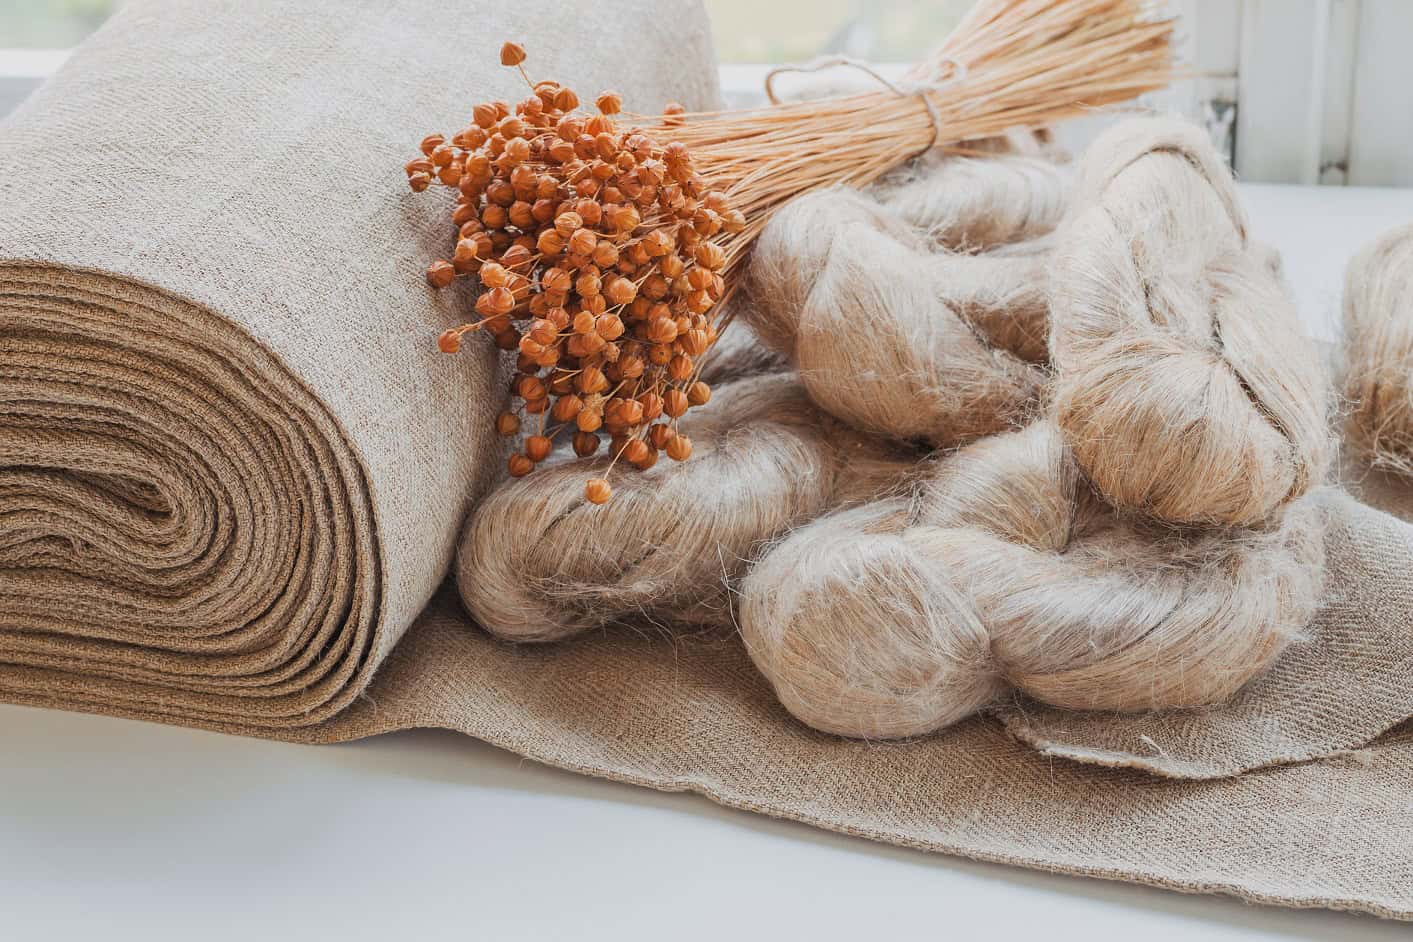 How Flax is made into Linen